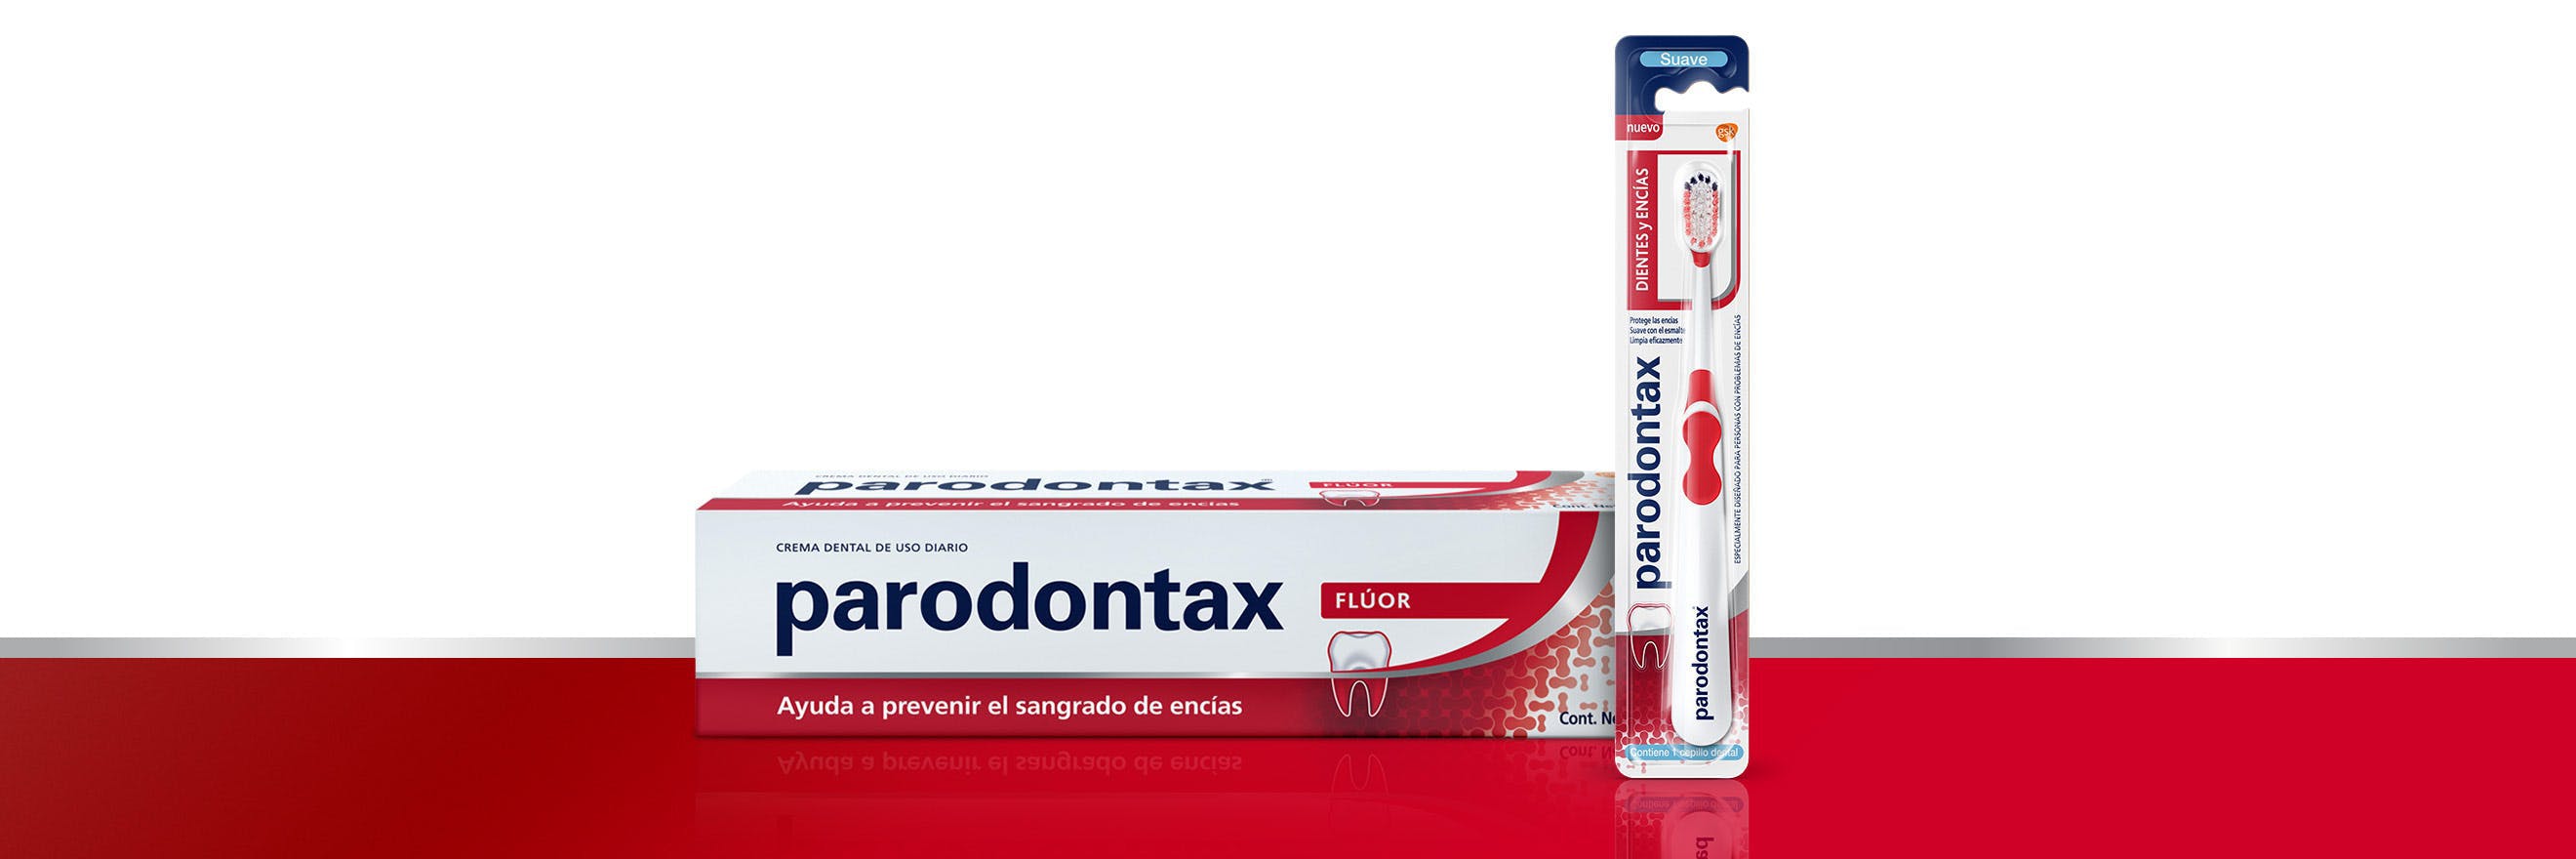 parodontax Daily Original toothpaste and Corsodyl Intensive Treatment alcohol free mouthwash